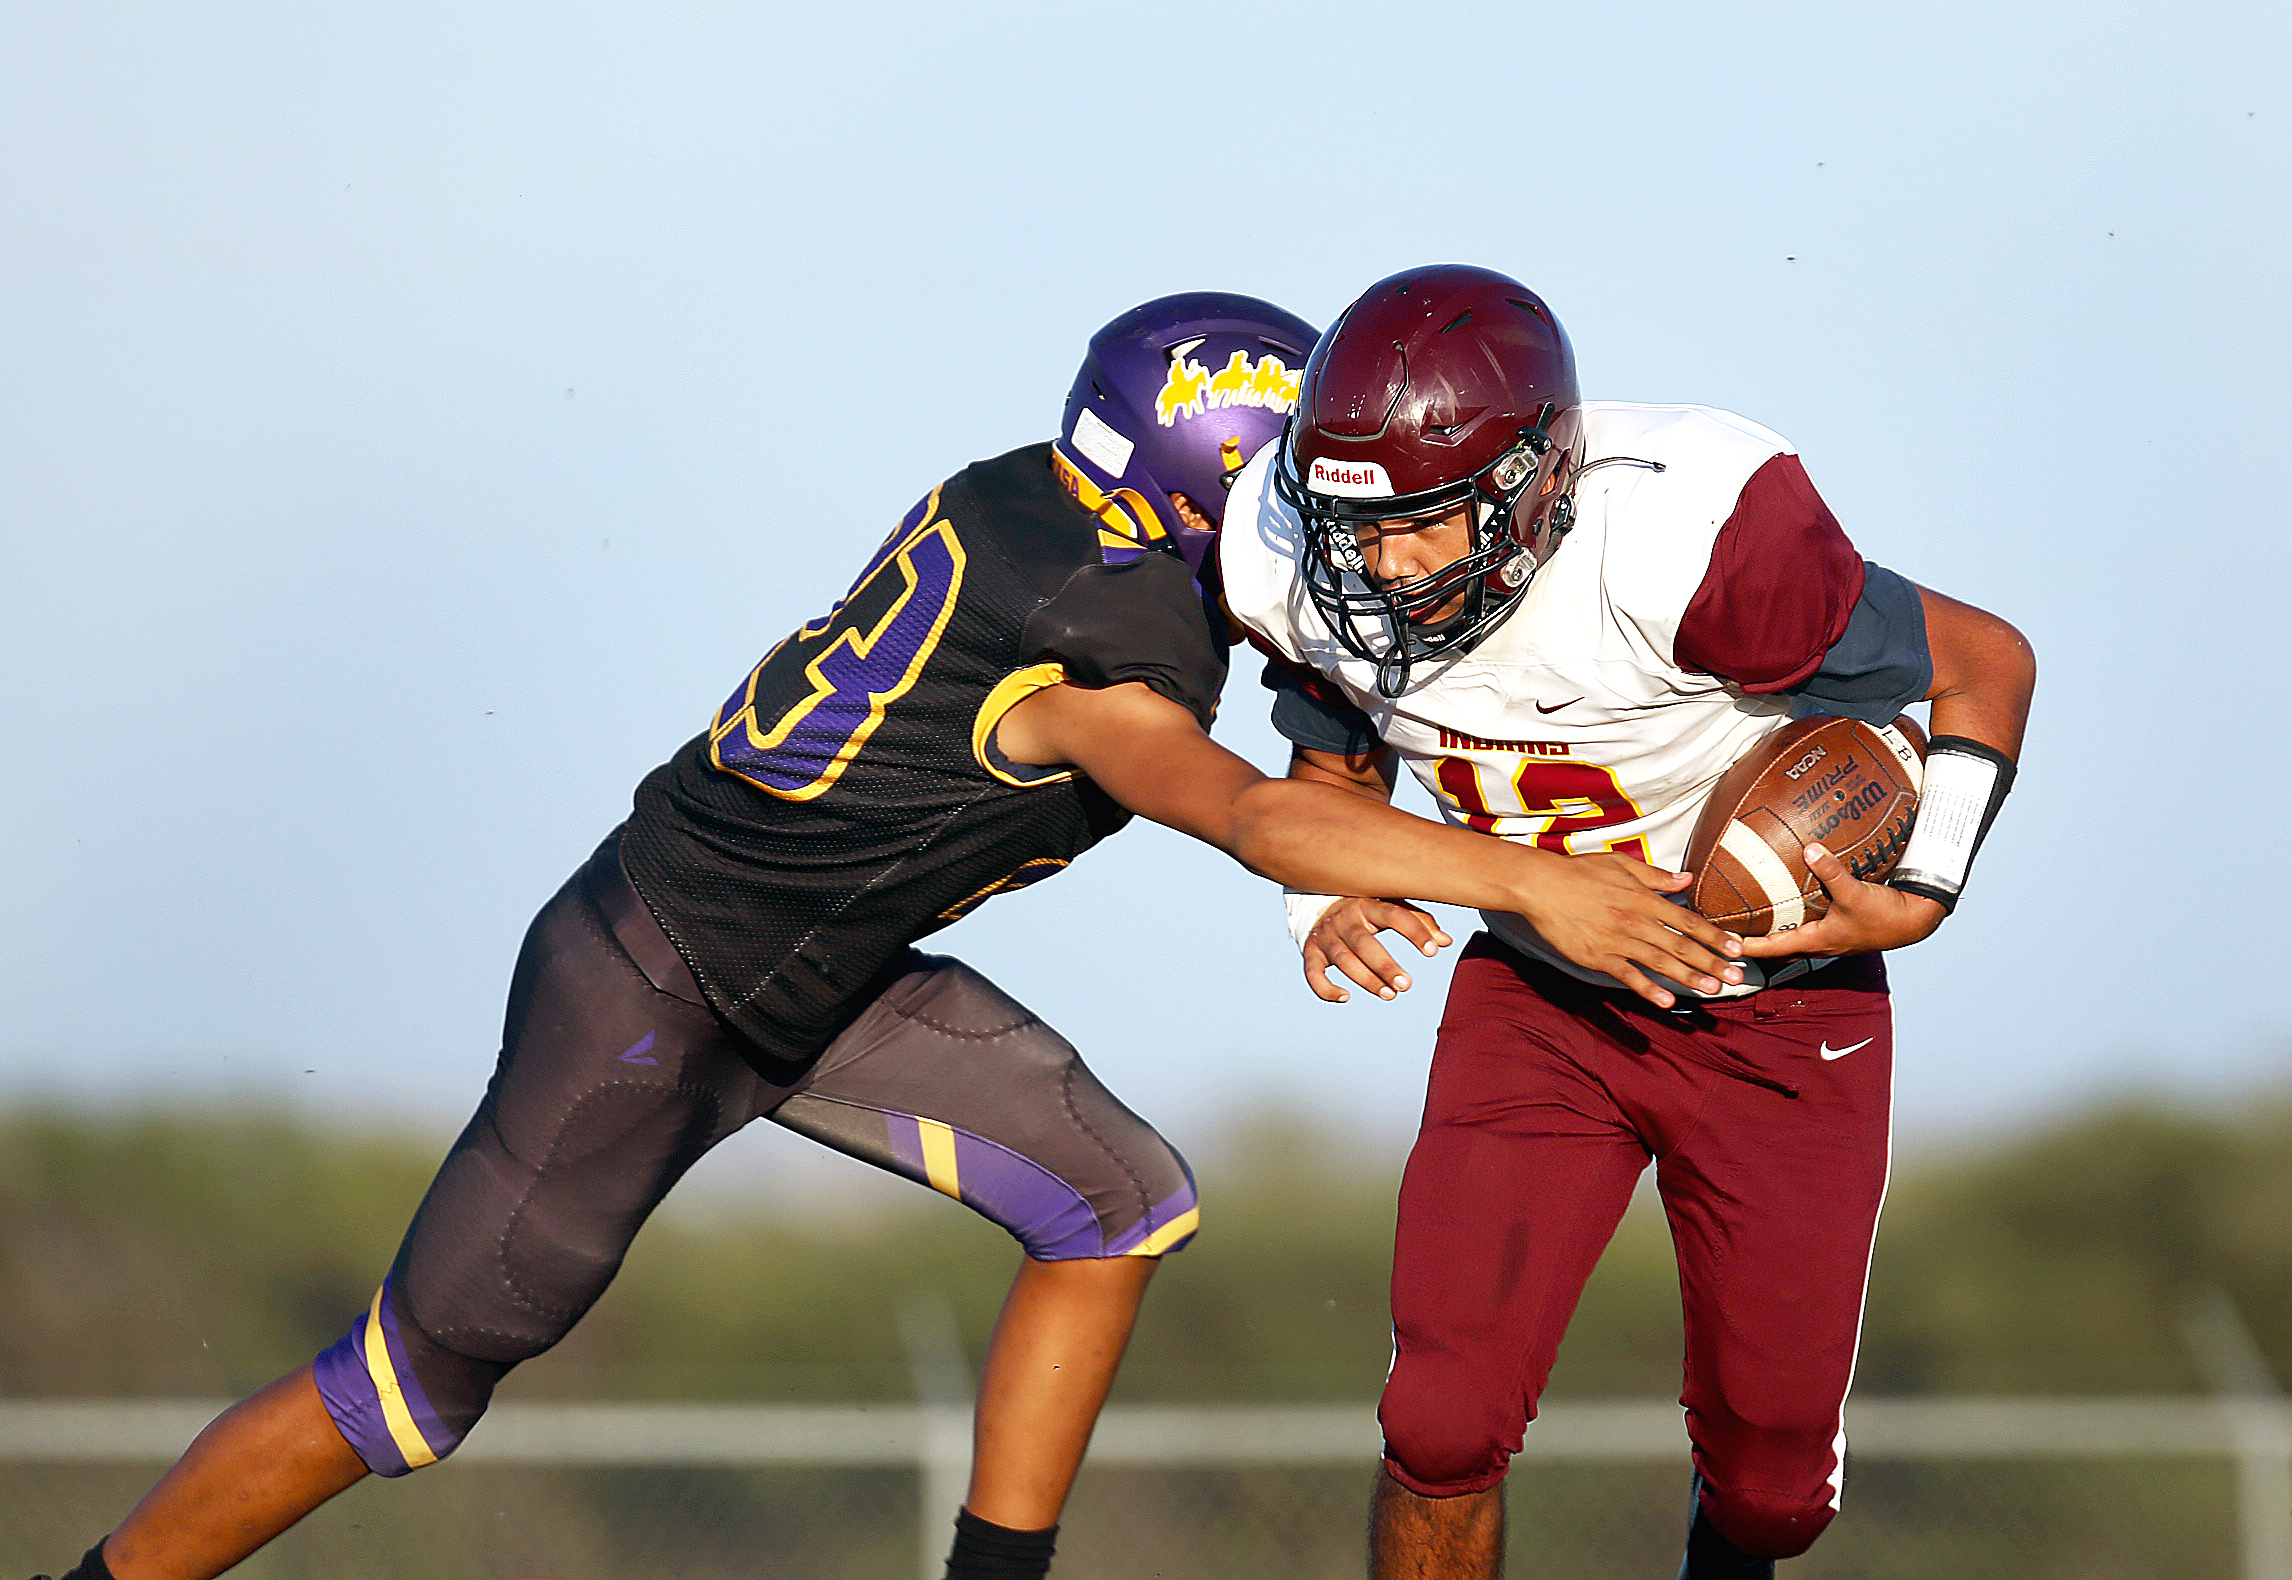 PHOTO GALLERY: HS Football Week 7 - All Nations Flandreau Indian School at Lower Brule 